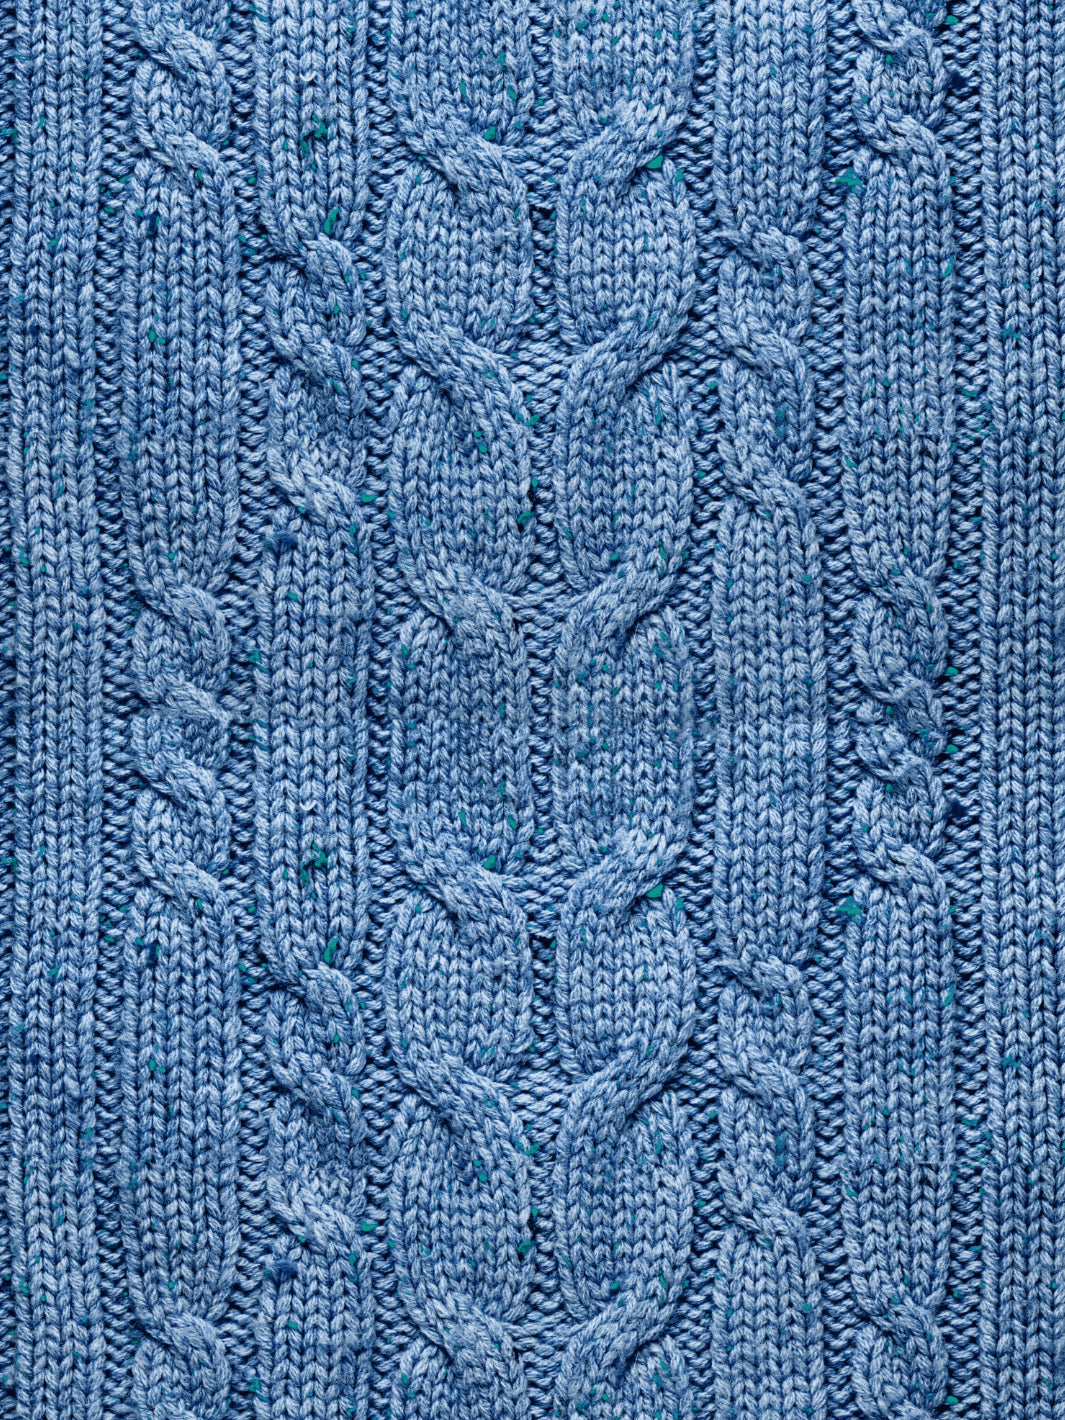 'Cable Knit' Wallpaper by Lingua Franca - Blue